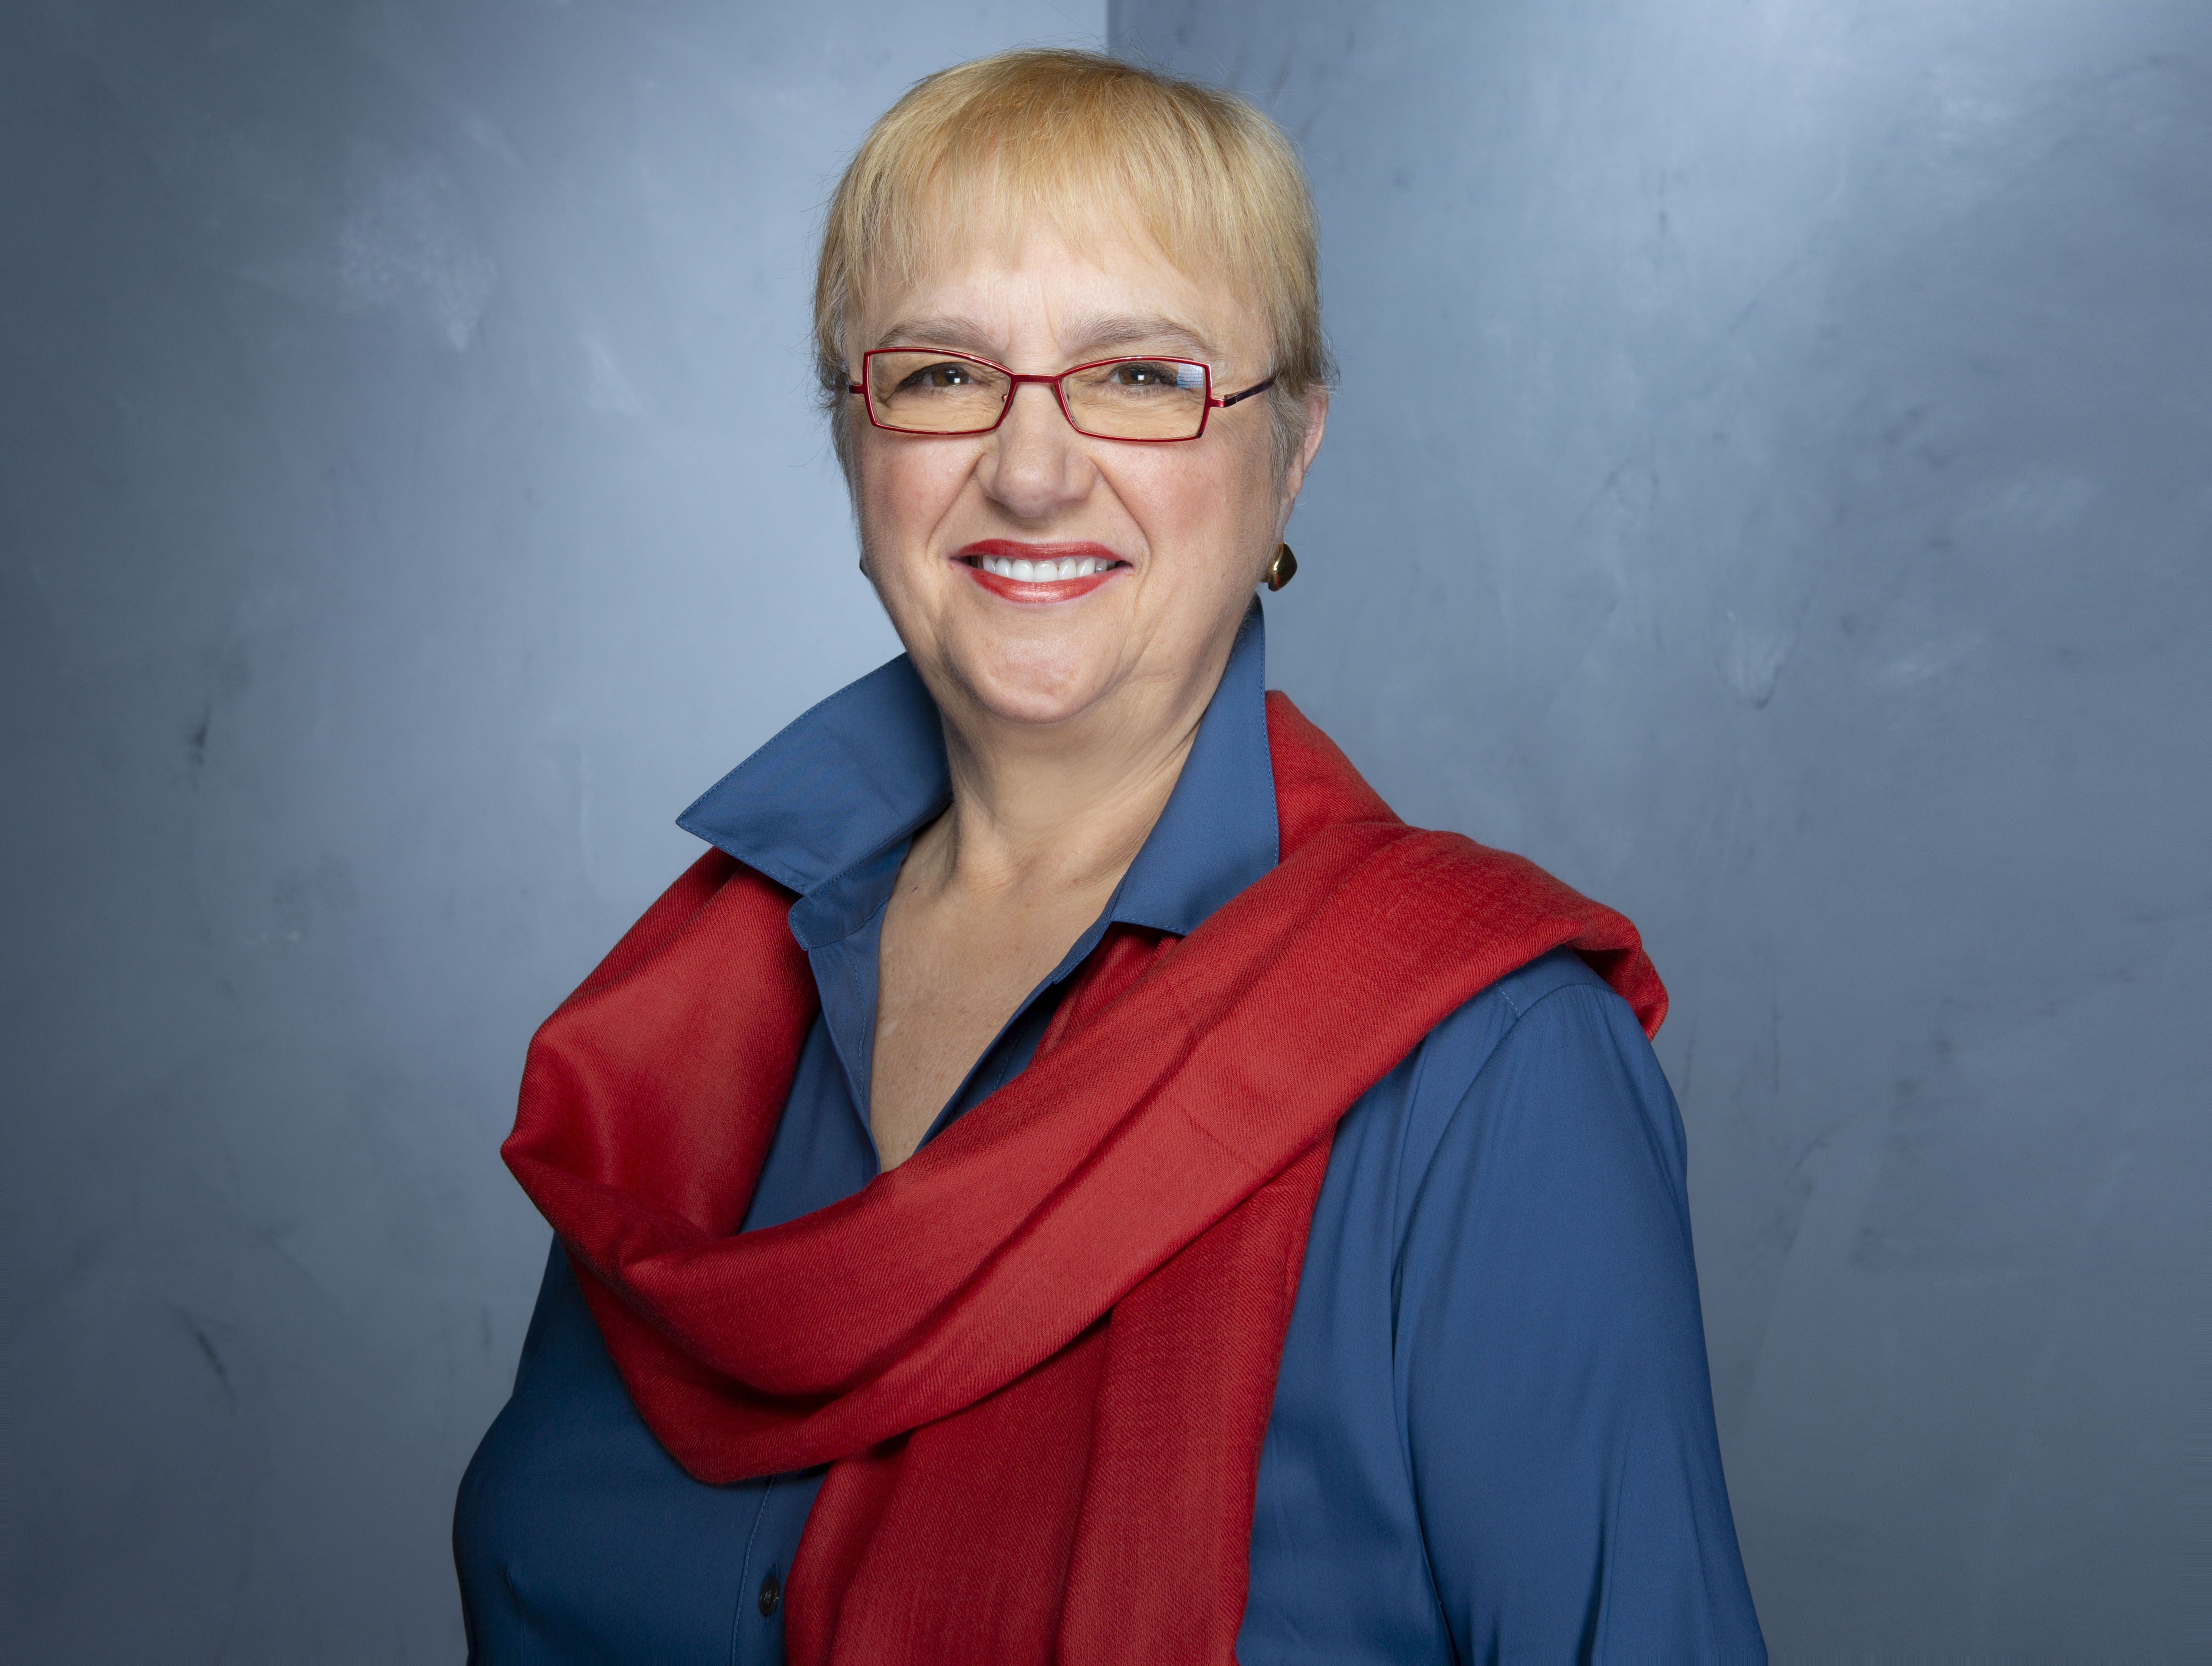 Celebrity chef Lidia Bastianich wears a blue top and red scarf in this photograph.